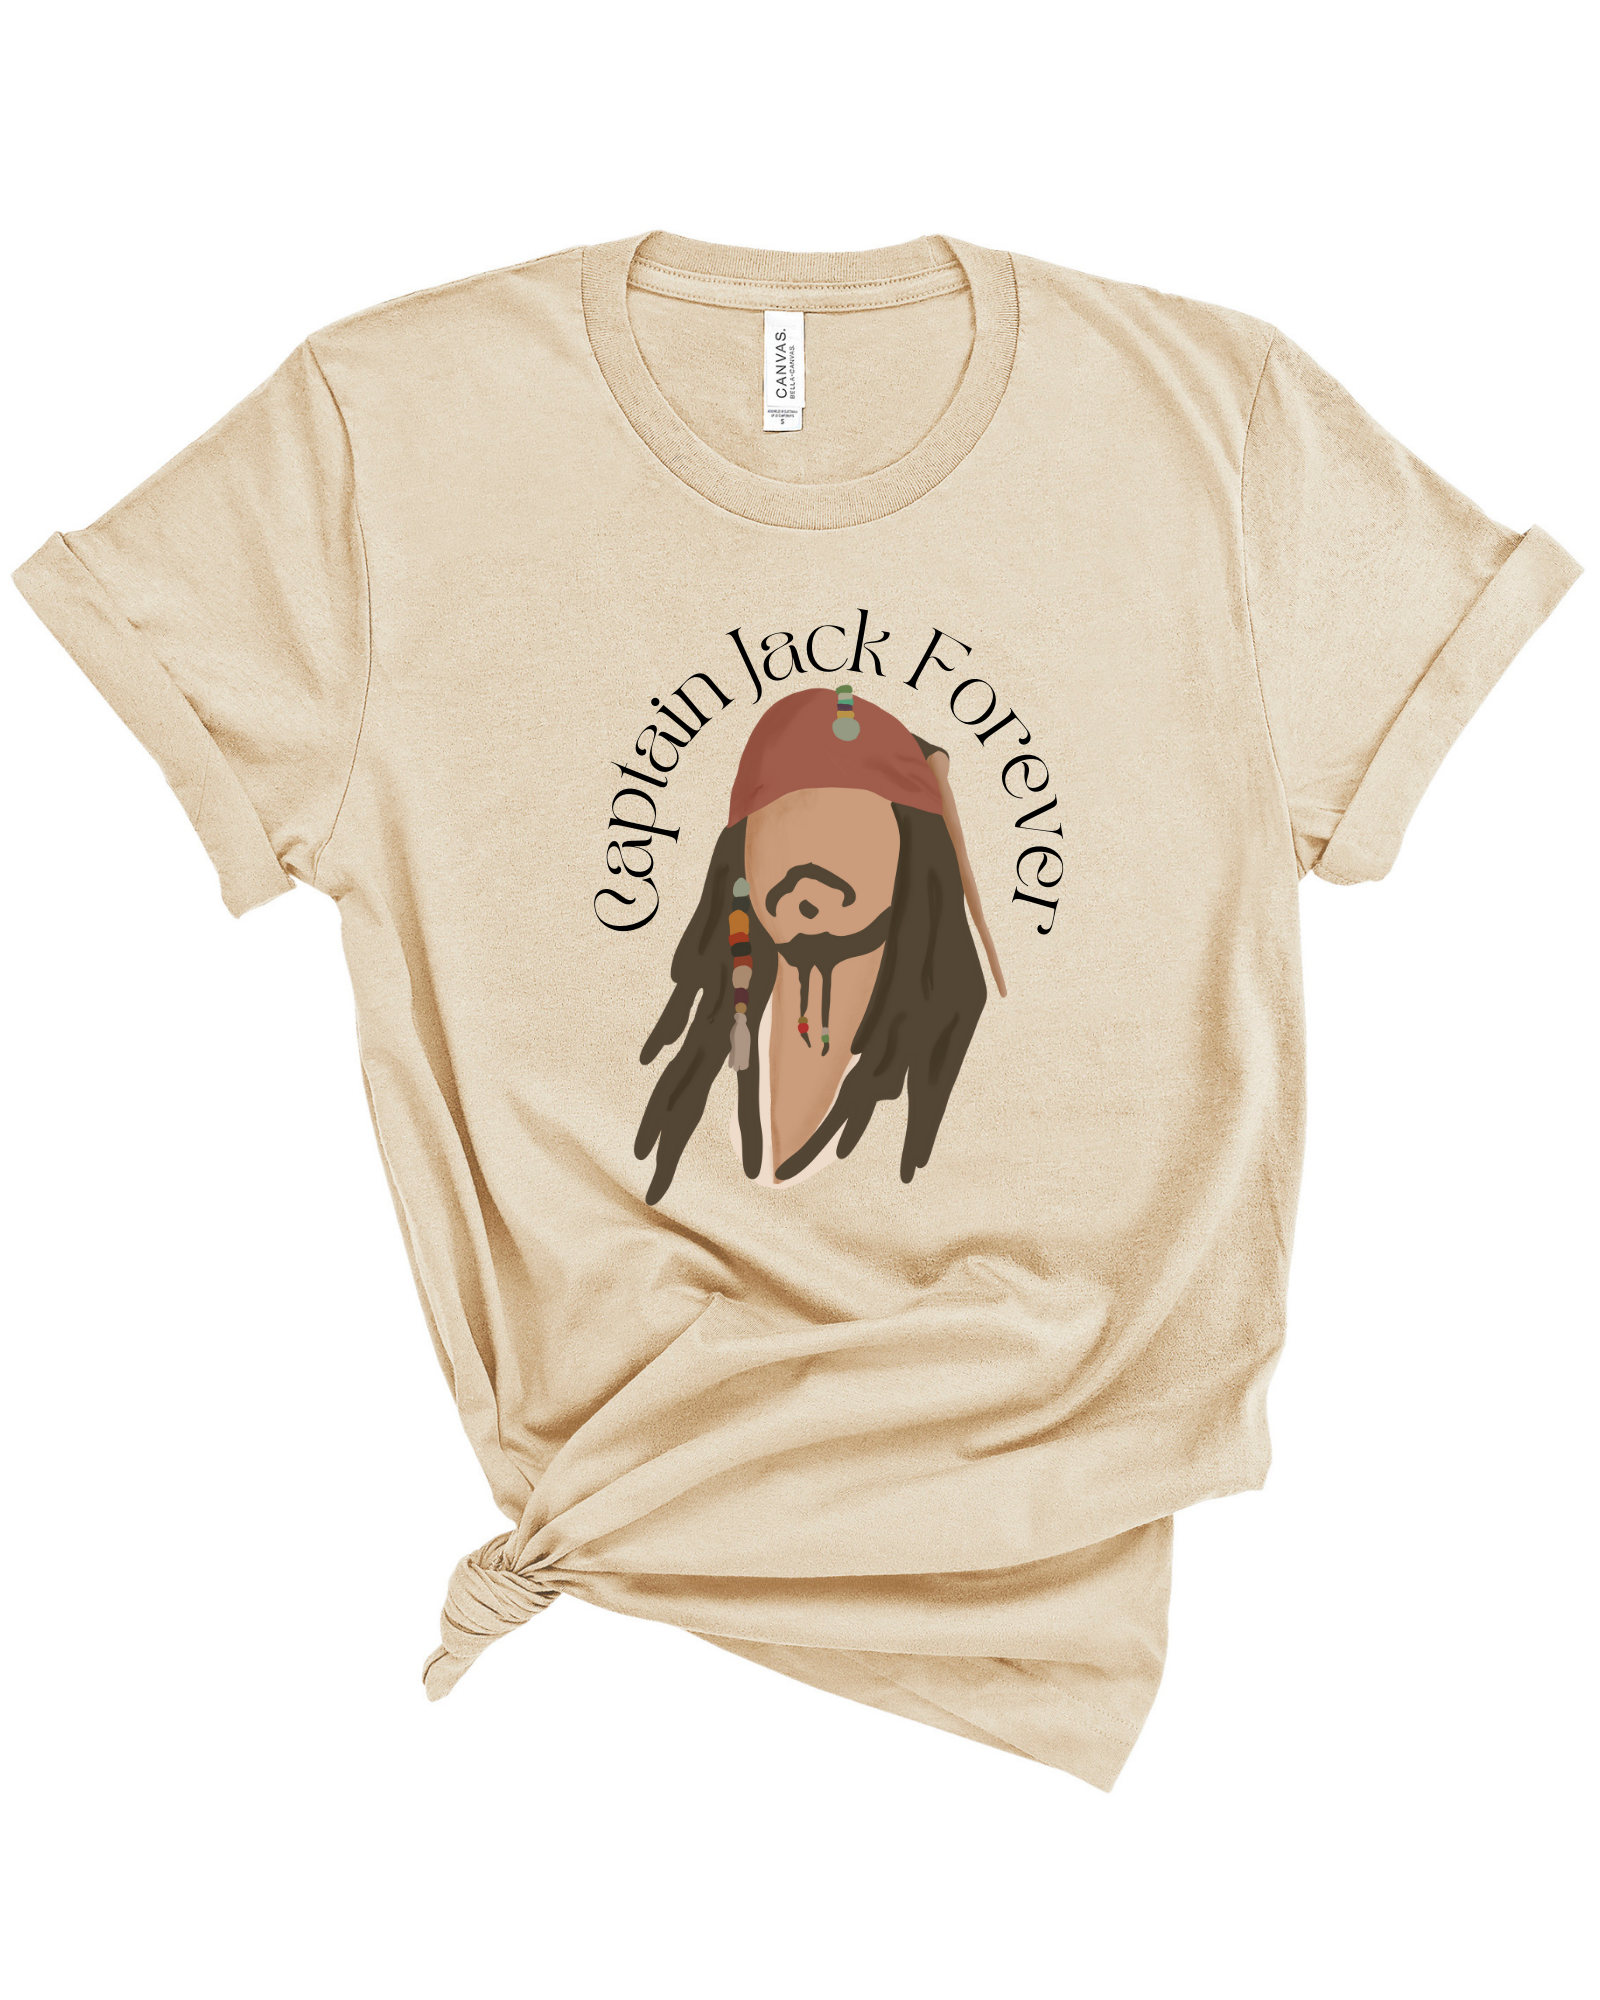 Captain Jack Forever | Adult Tee-Adult Tee-Sister Shirts-Sister Shirts, Cute & Custom Tees for Mama & Littles in Trussville, Alabama.